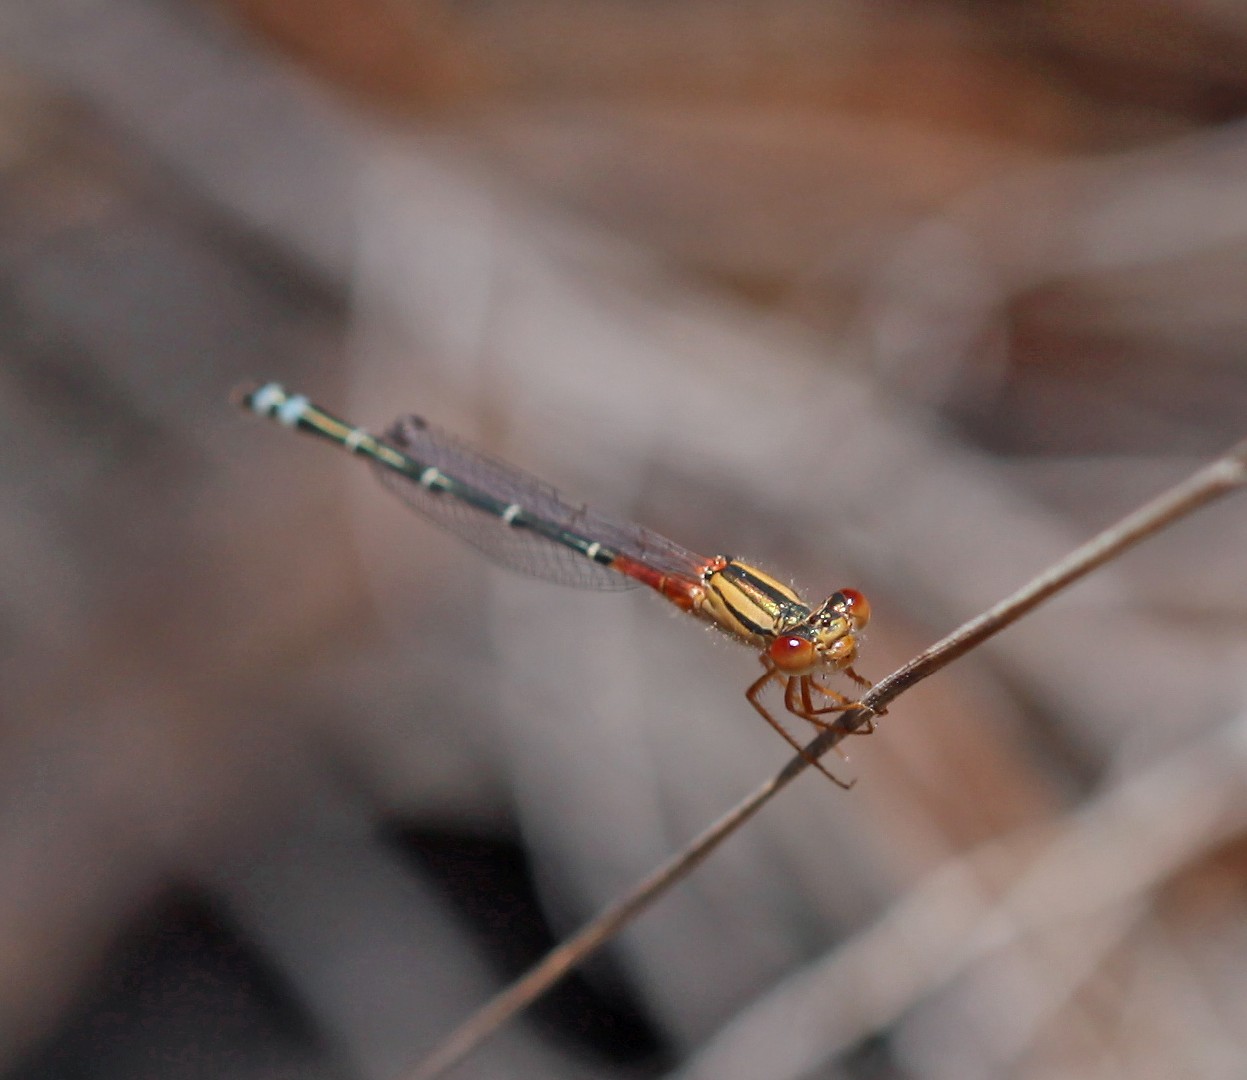 Xanthagrion (Xanthagrion)